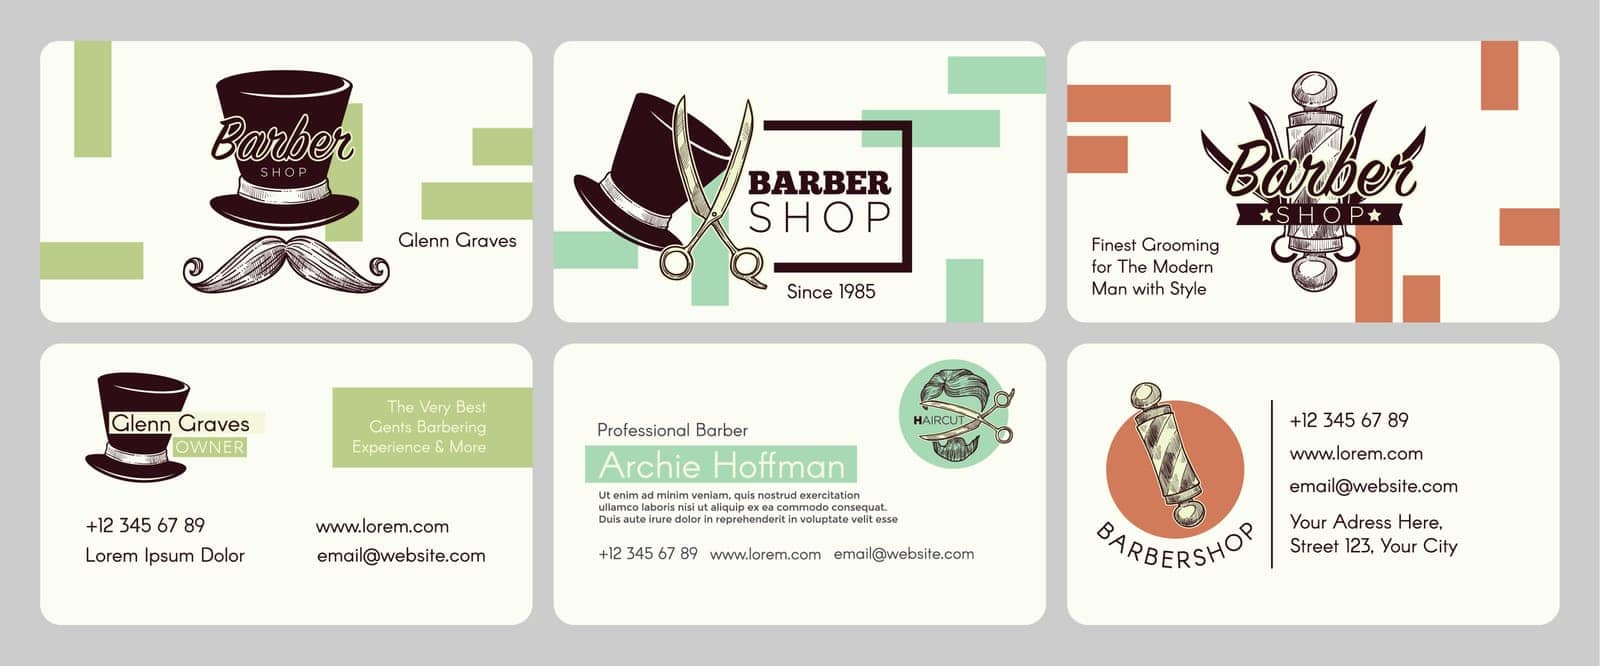 Barber shop company emblem at business card set. Hand drawn elements with man beard and mustache at corporate design collection, vector illustration. Corporate paper for grooming services and barbers